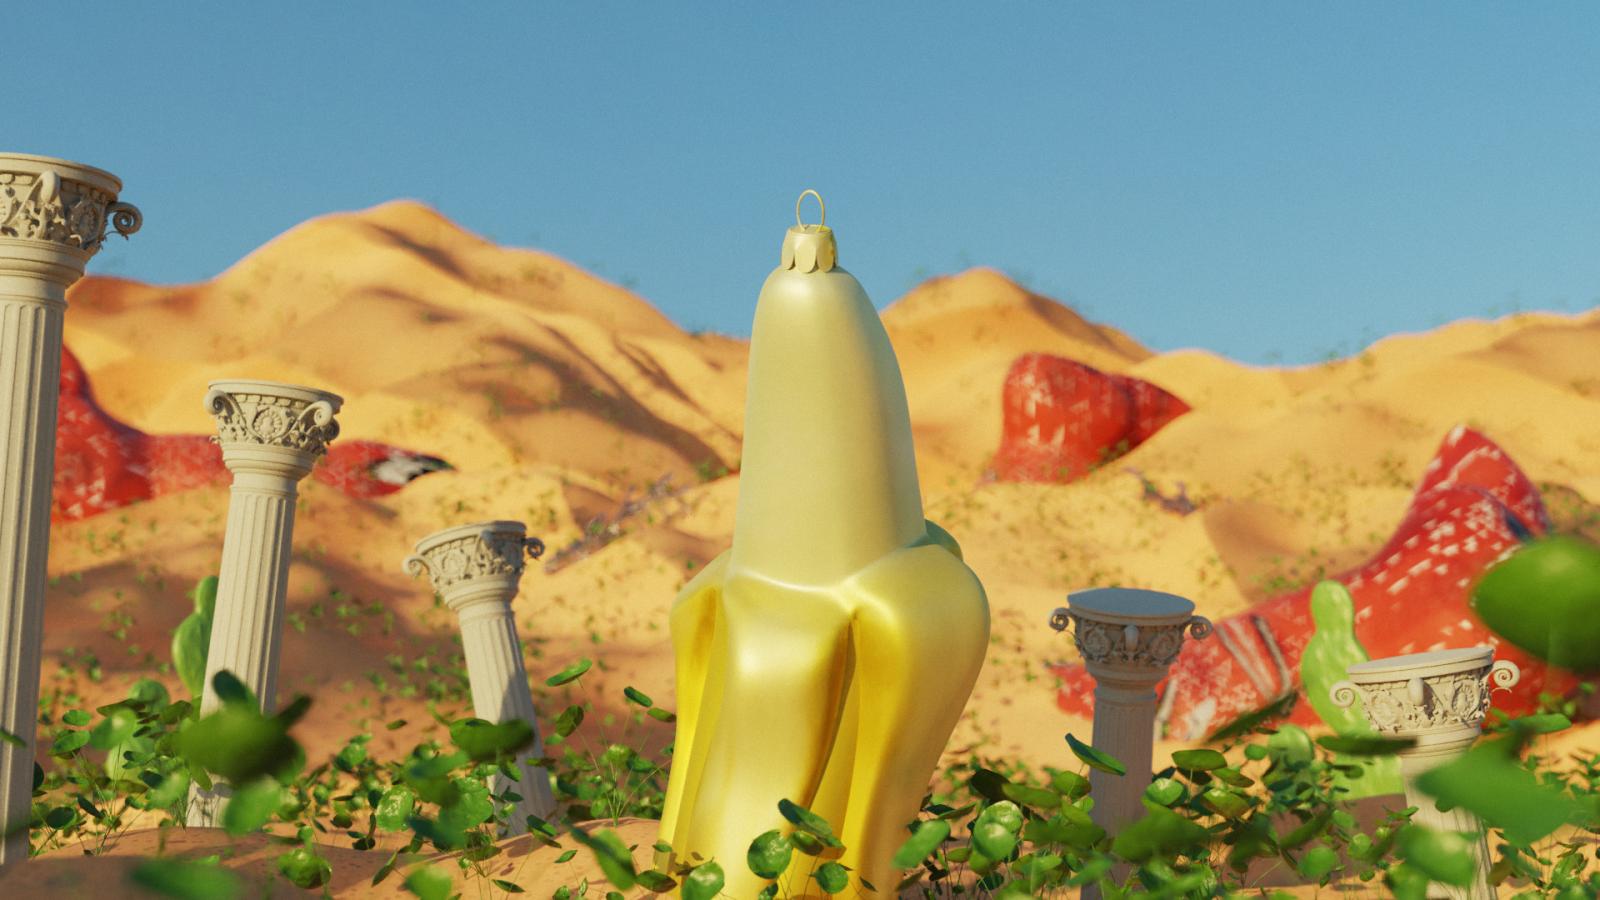 3D rendering centered on a stylized banana surrounded by roman styled columns, approximately the size of the banana, in desert setting. The bottoms of the columns and banana are surrounded by greenery. Mountains of sand and red structures fill the background and a blue sky covers the top third of the image.